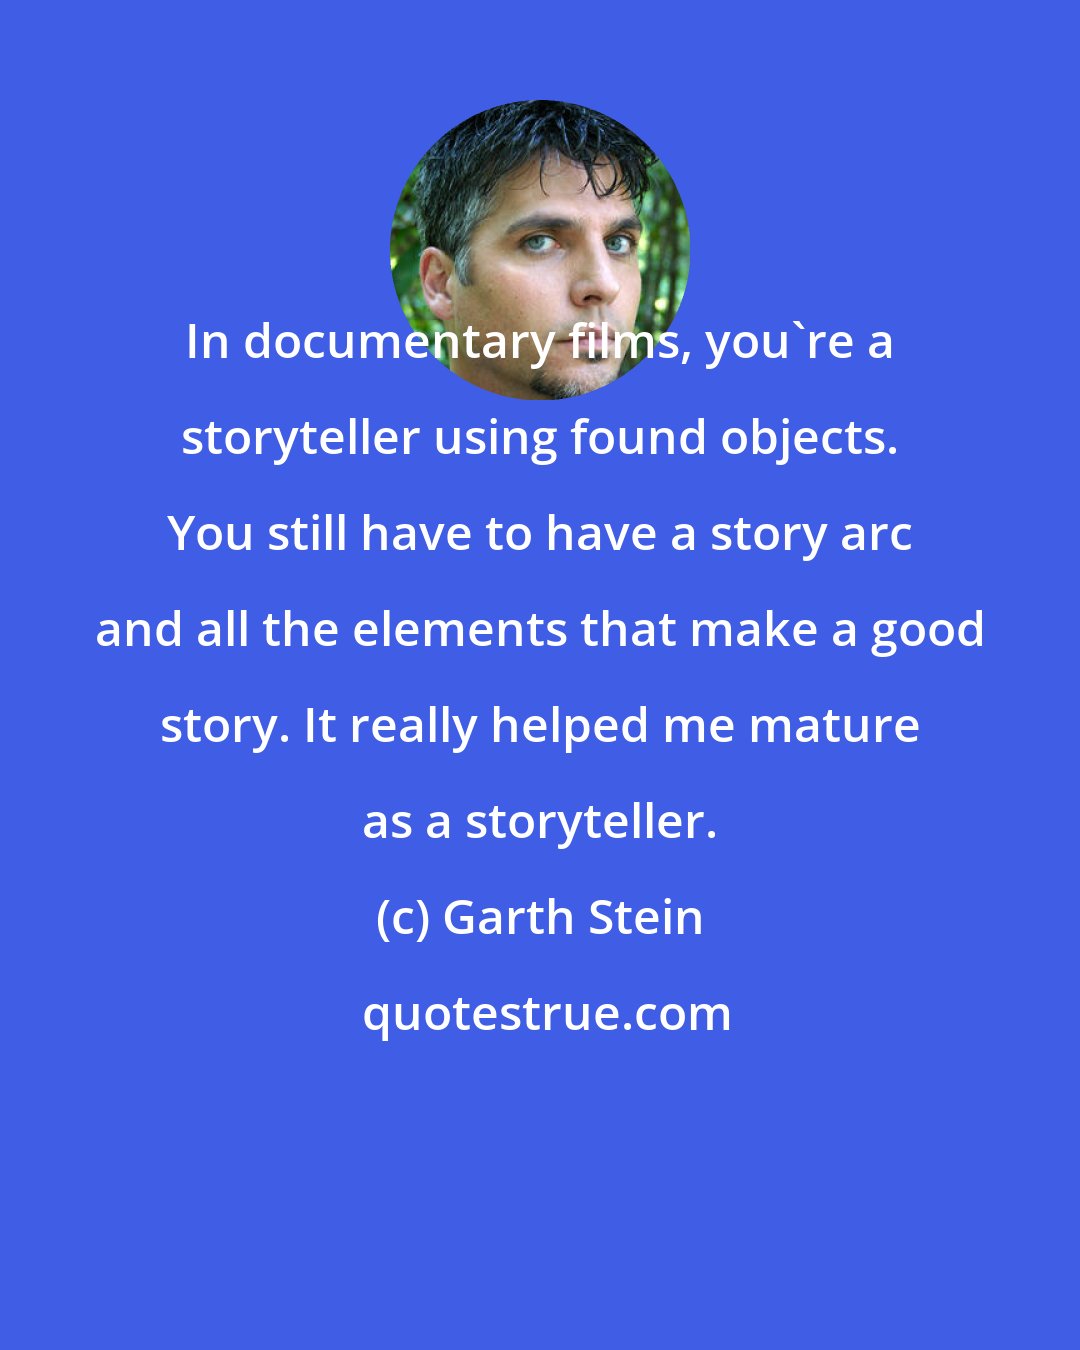 Garth Stein: In documentary films, you're a storyteller using found objects. You still have to have a story arc and all the elements that make a good story. It really helped me mature as a storyteller.